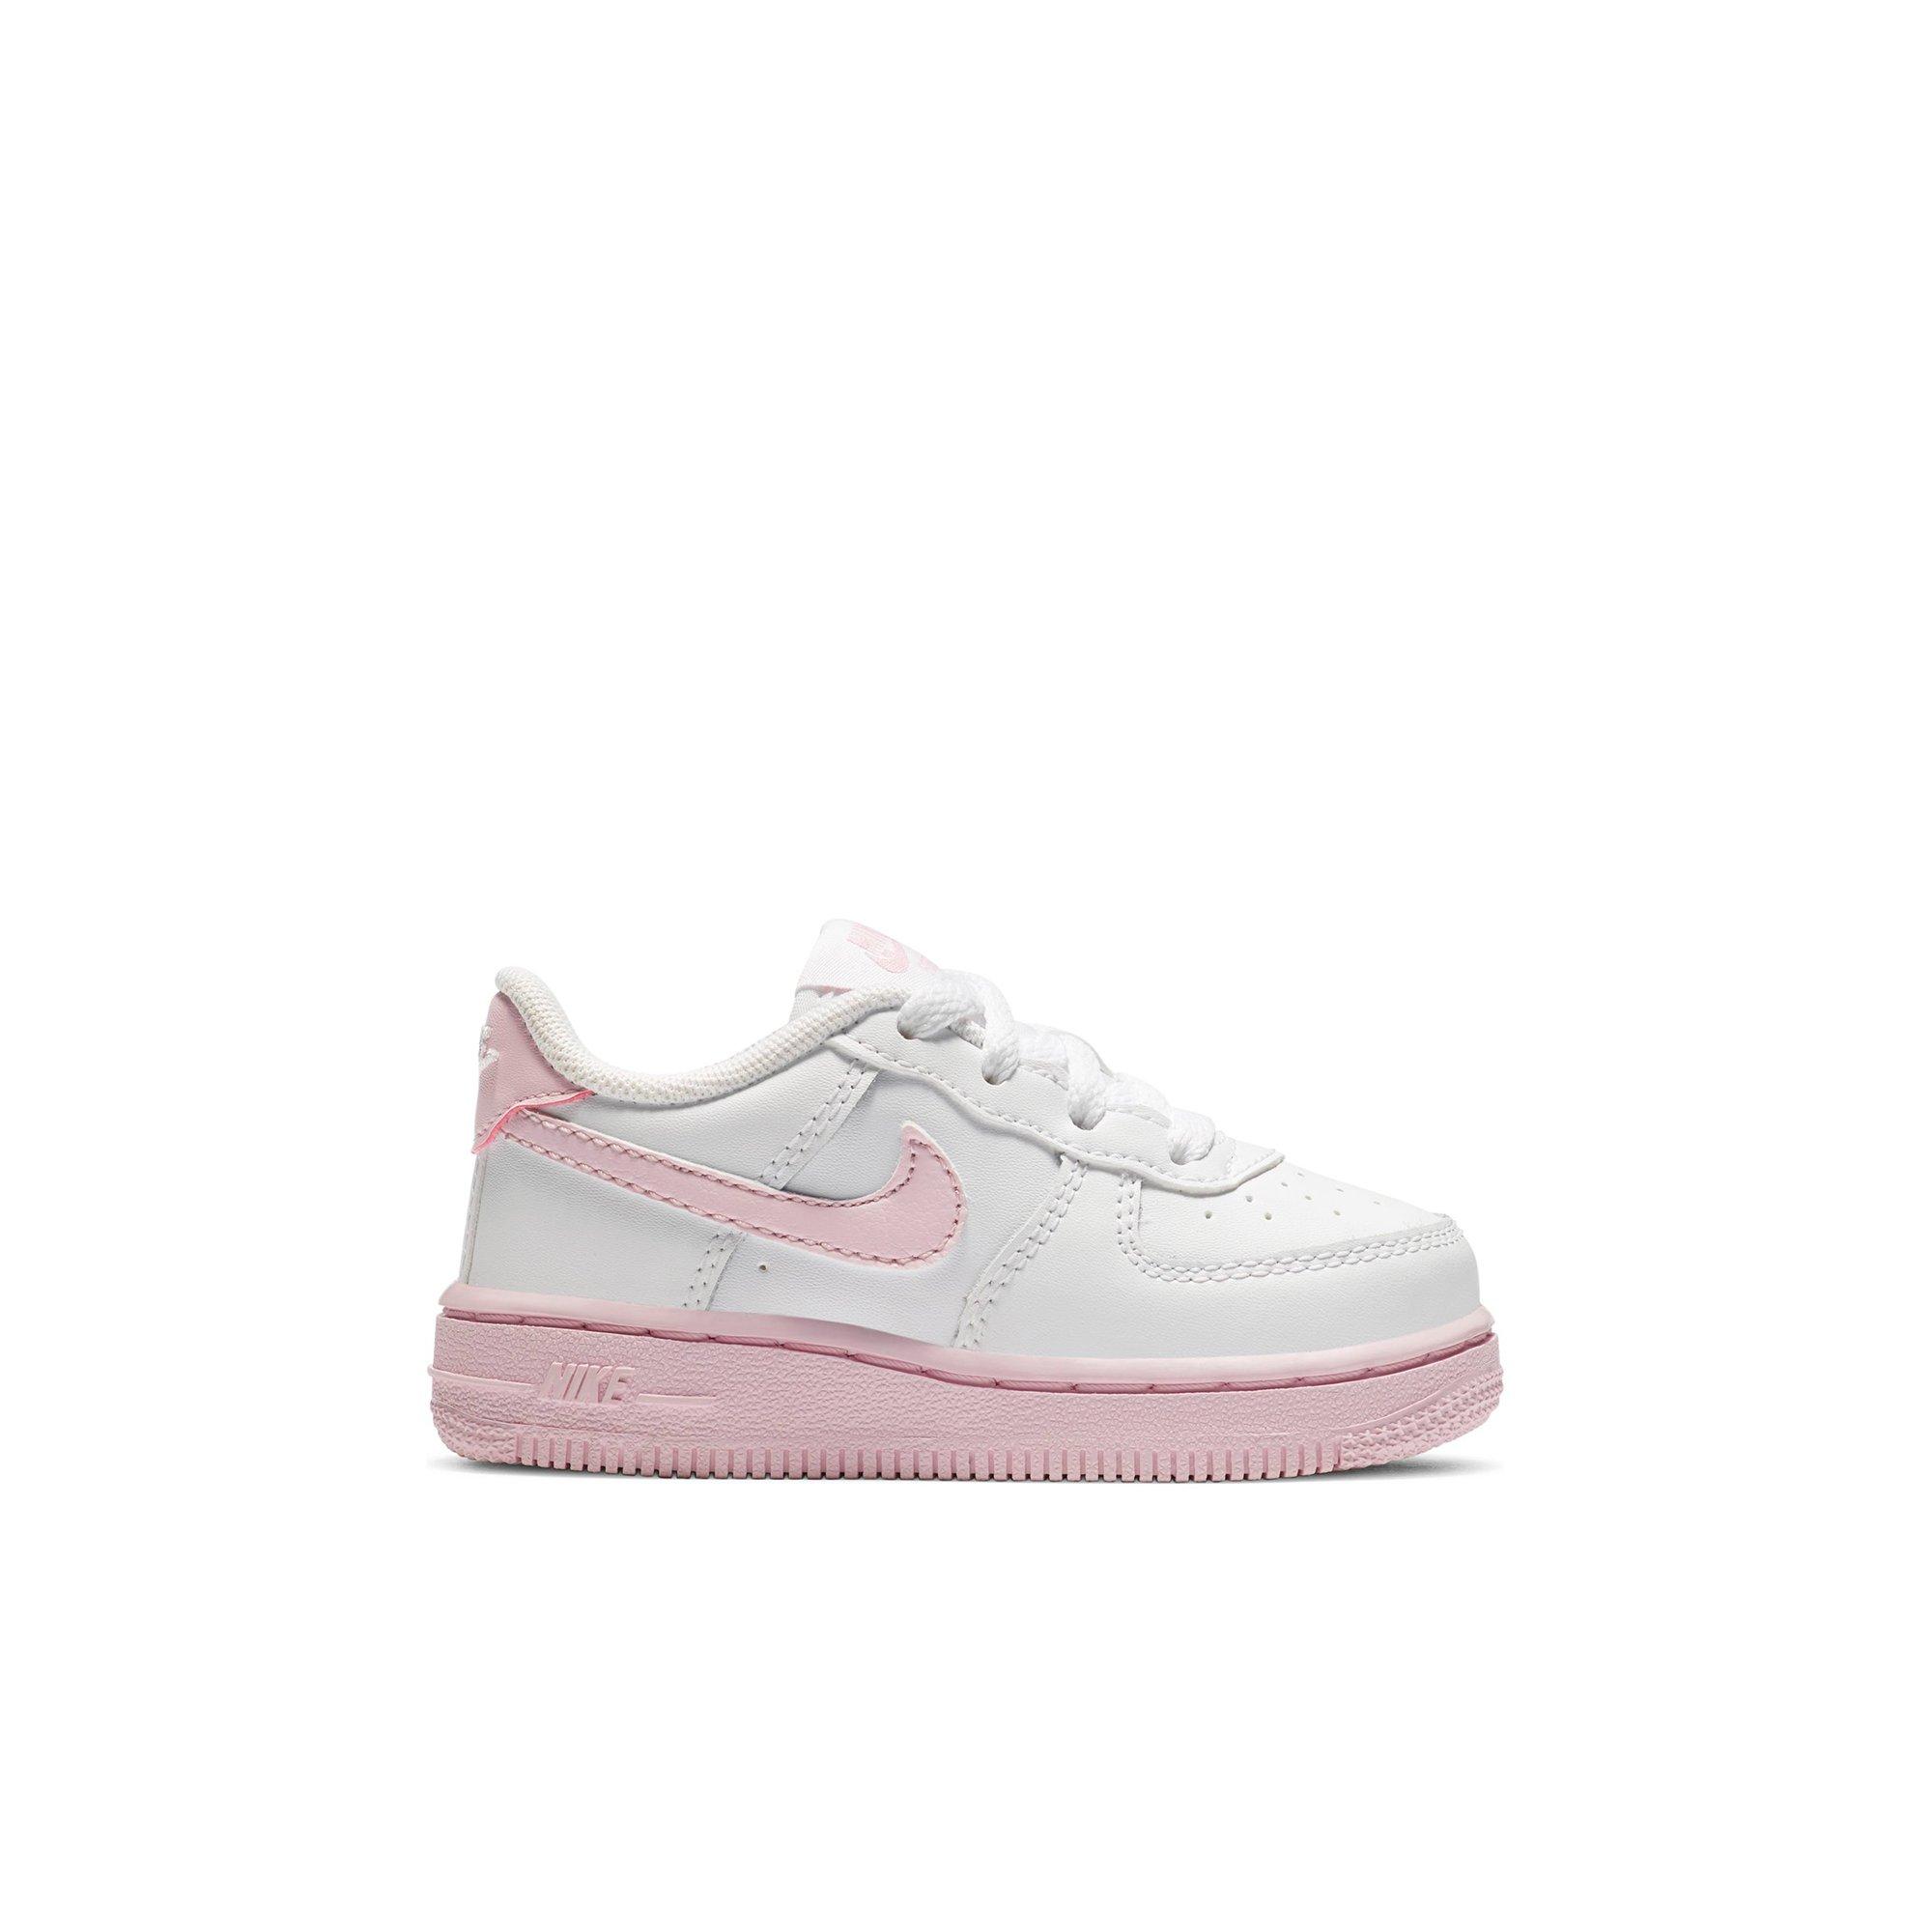 pink air force infant